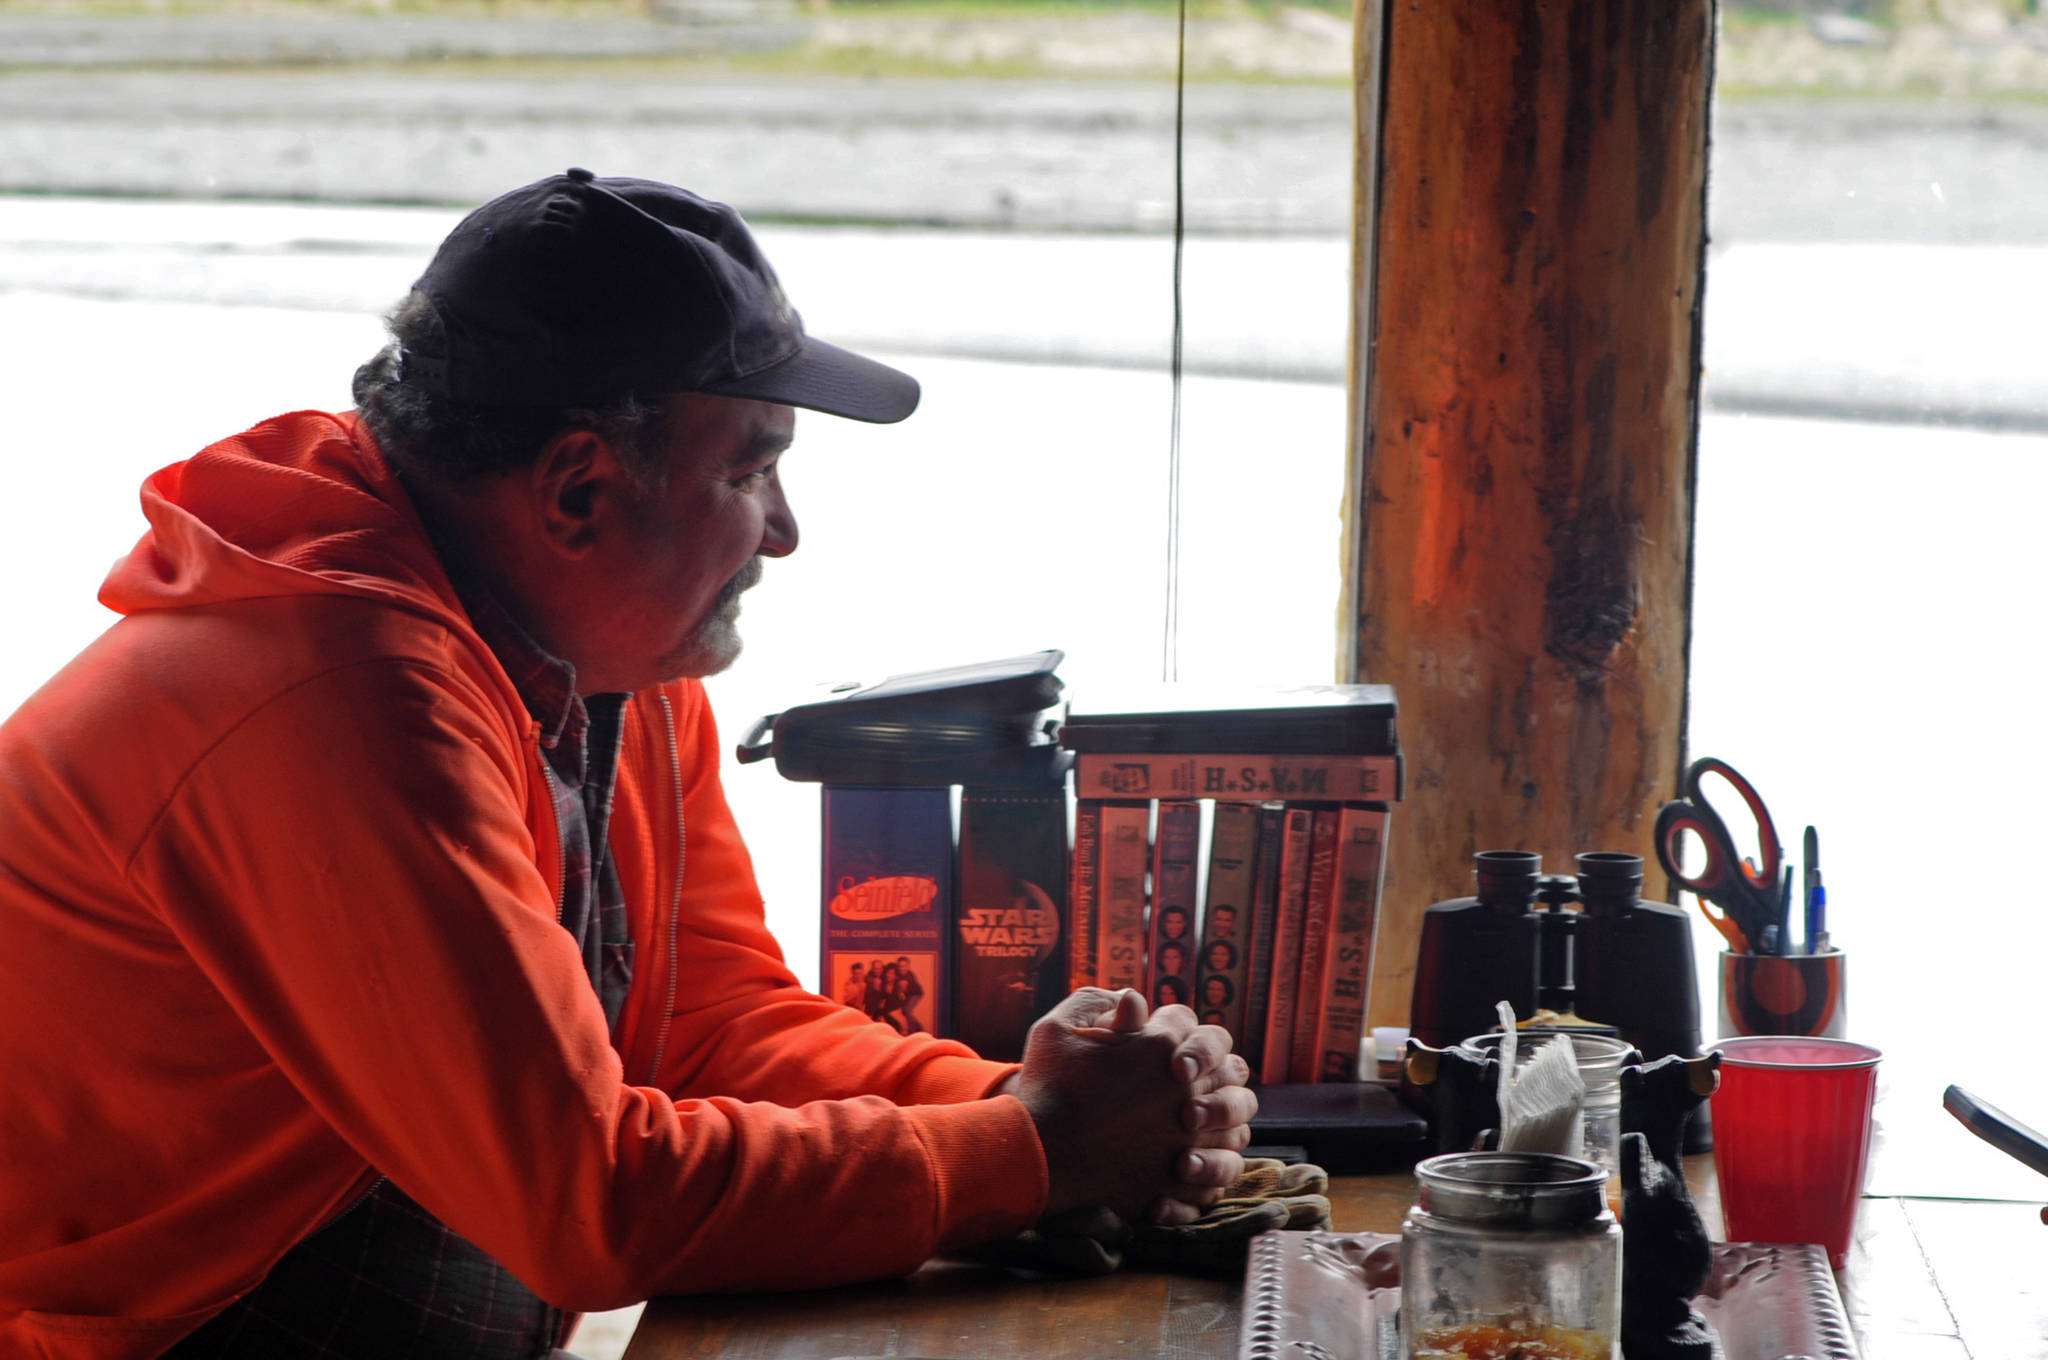 Steve Flick, one of the property owners on Dow Island’s north bank, relaxes in Natalie and Chad Smyre’s cabin on the island Saturday, May 27, 2017 in Funny River, Alaska. Flick, a professional construction contractor in Missouri, worked with the Smyres and two other property owners to install an extensive bank restoration project on the island to preempt the Kenai River’s erosion that has been washing away feet of their properties each year. (Elizabeth Earl/Peninsula Clarion)  Steve Flick, one of the property owners on Dow Island’s north bank, relaxes in Natalie and Chad Smyre’s cabin on the island Saturday, May 27, 2017 in Funny River, Alaska. Flick, a professional construction contractor in Missouri, worked with the Smyres and two other property owners to install an extensive bank restoration project on the island to preempt the Kenai River’s erosion that has been washing away feet of their properties each year. (Elizabeth Earl/Peninsula Clarion)